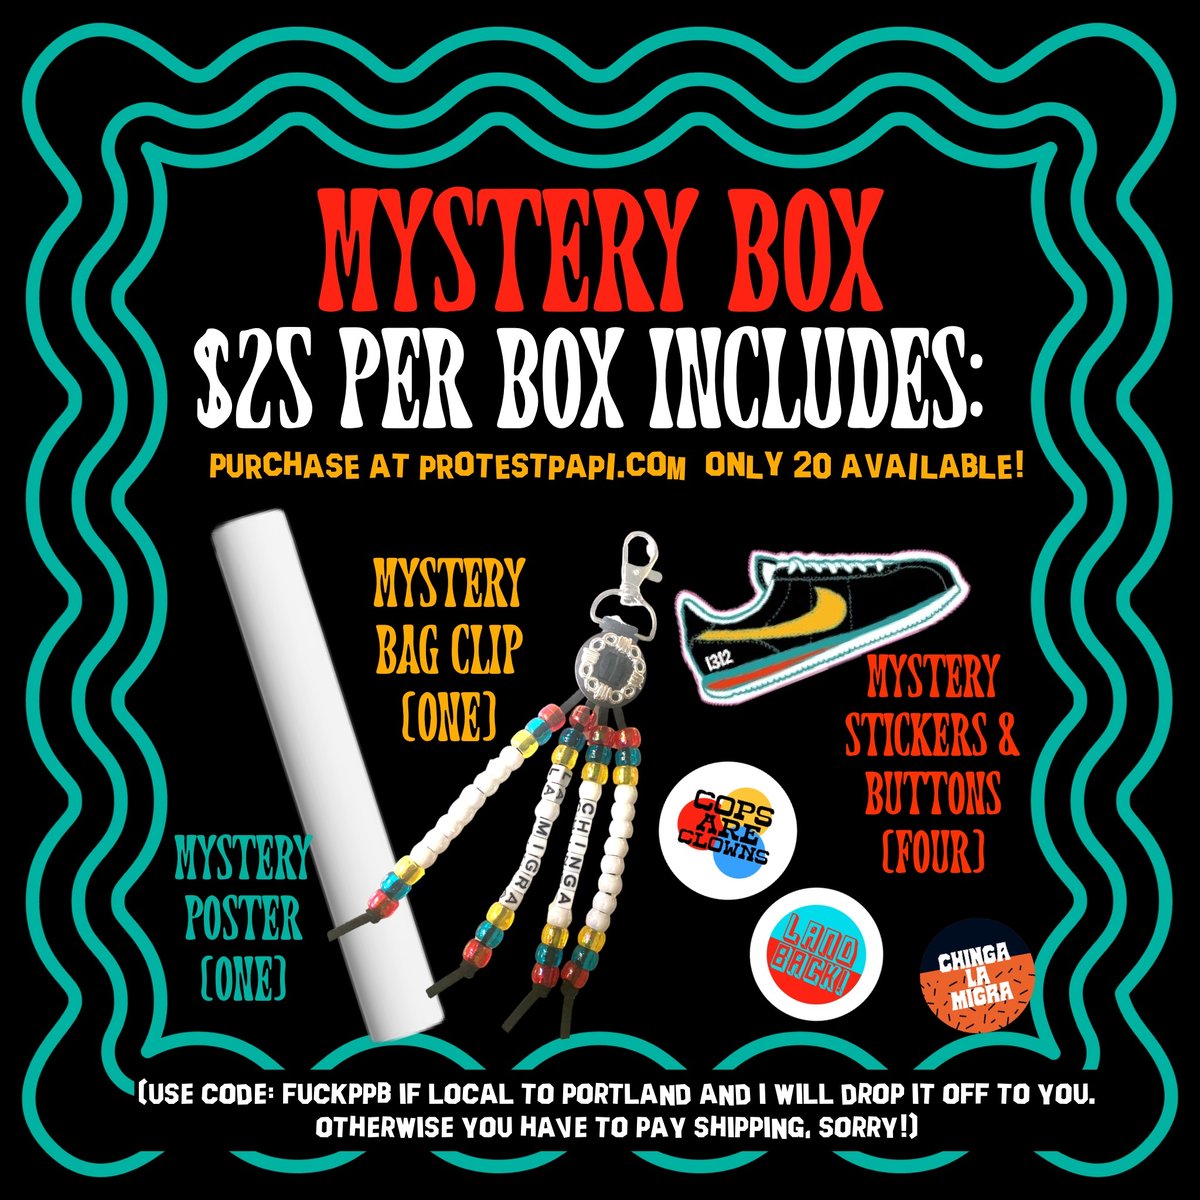 How To Create The Ultimate Mystery Box Fundraiser - Givergy